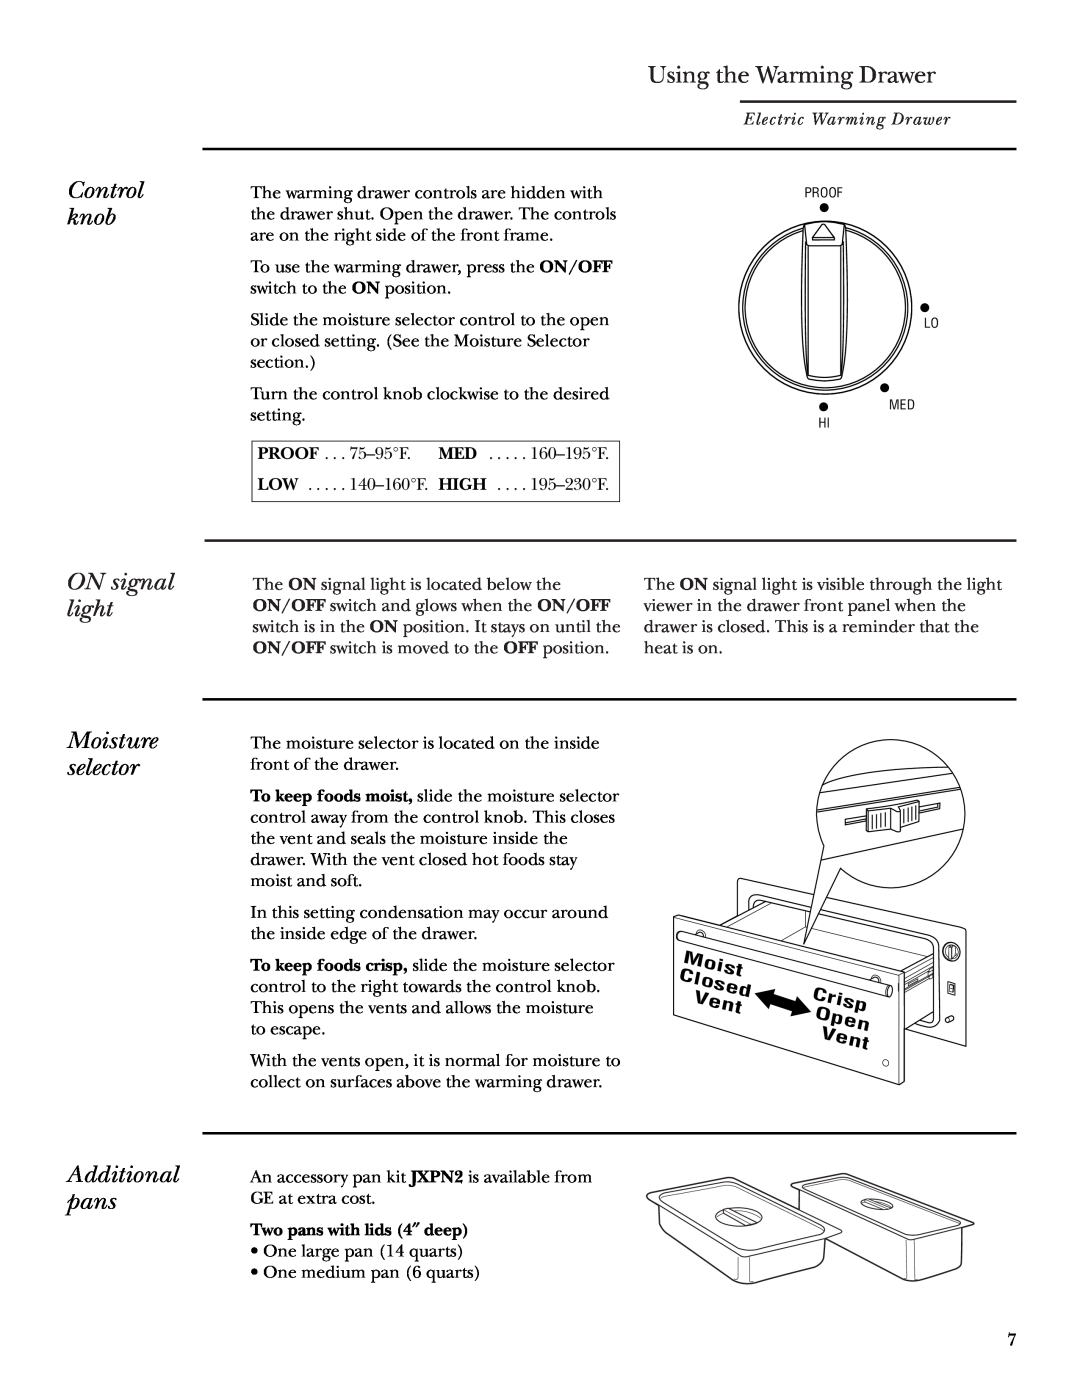 GE ZKD910 owner manual Using the Warming Drawer, Moist, Closed, Crisp, Vent, Open 